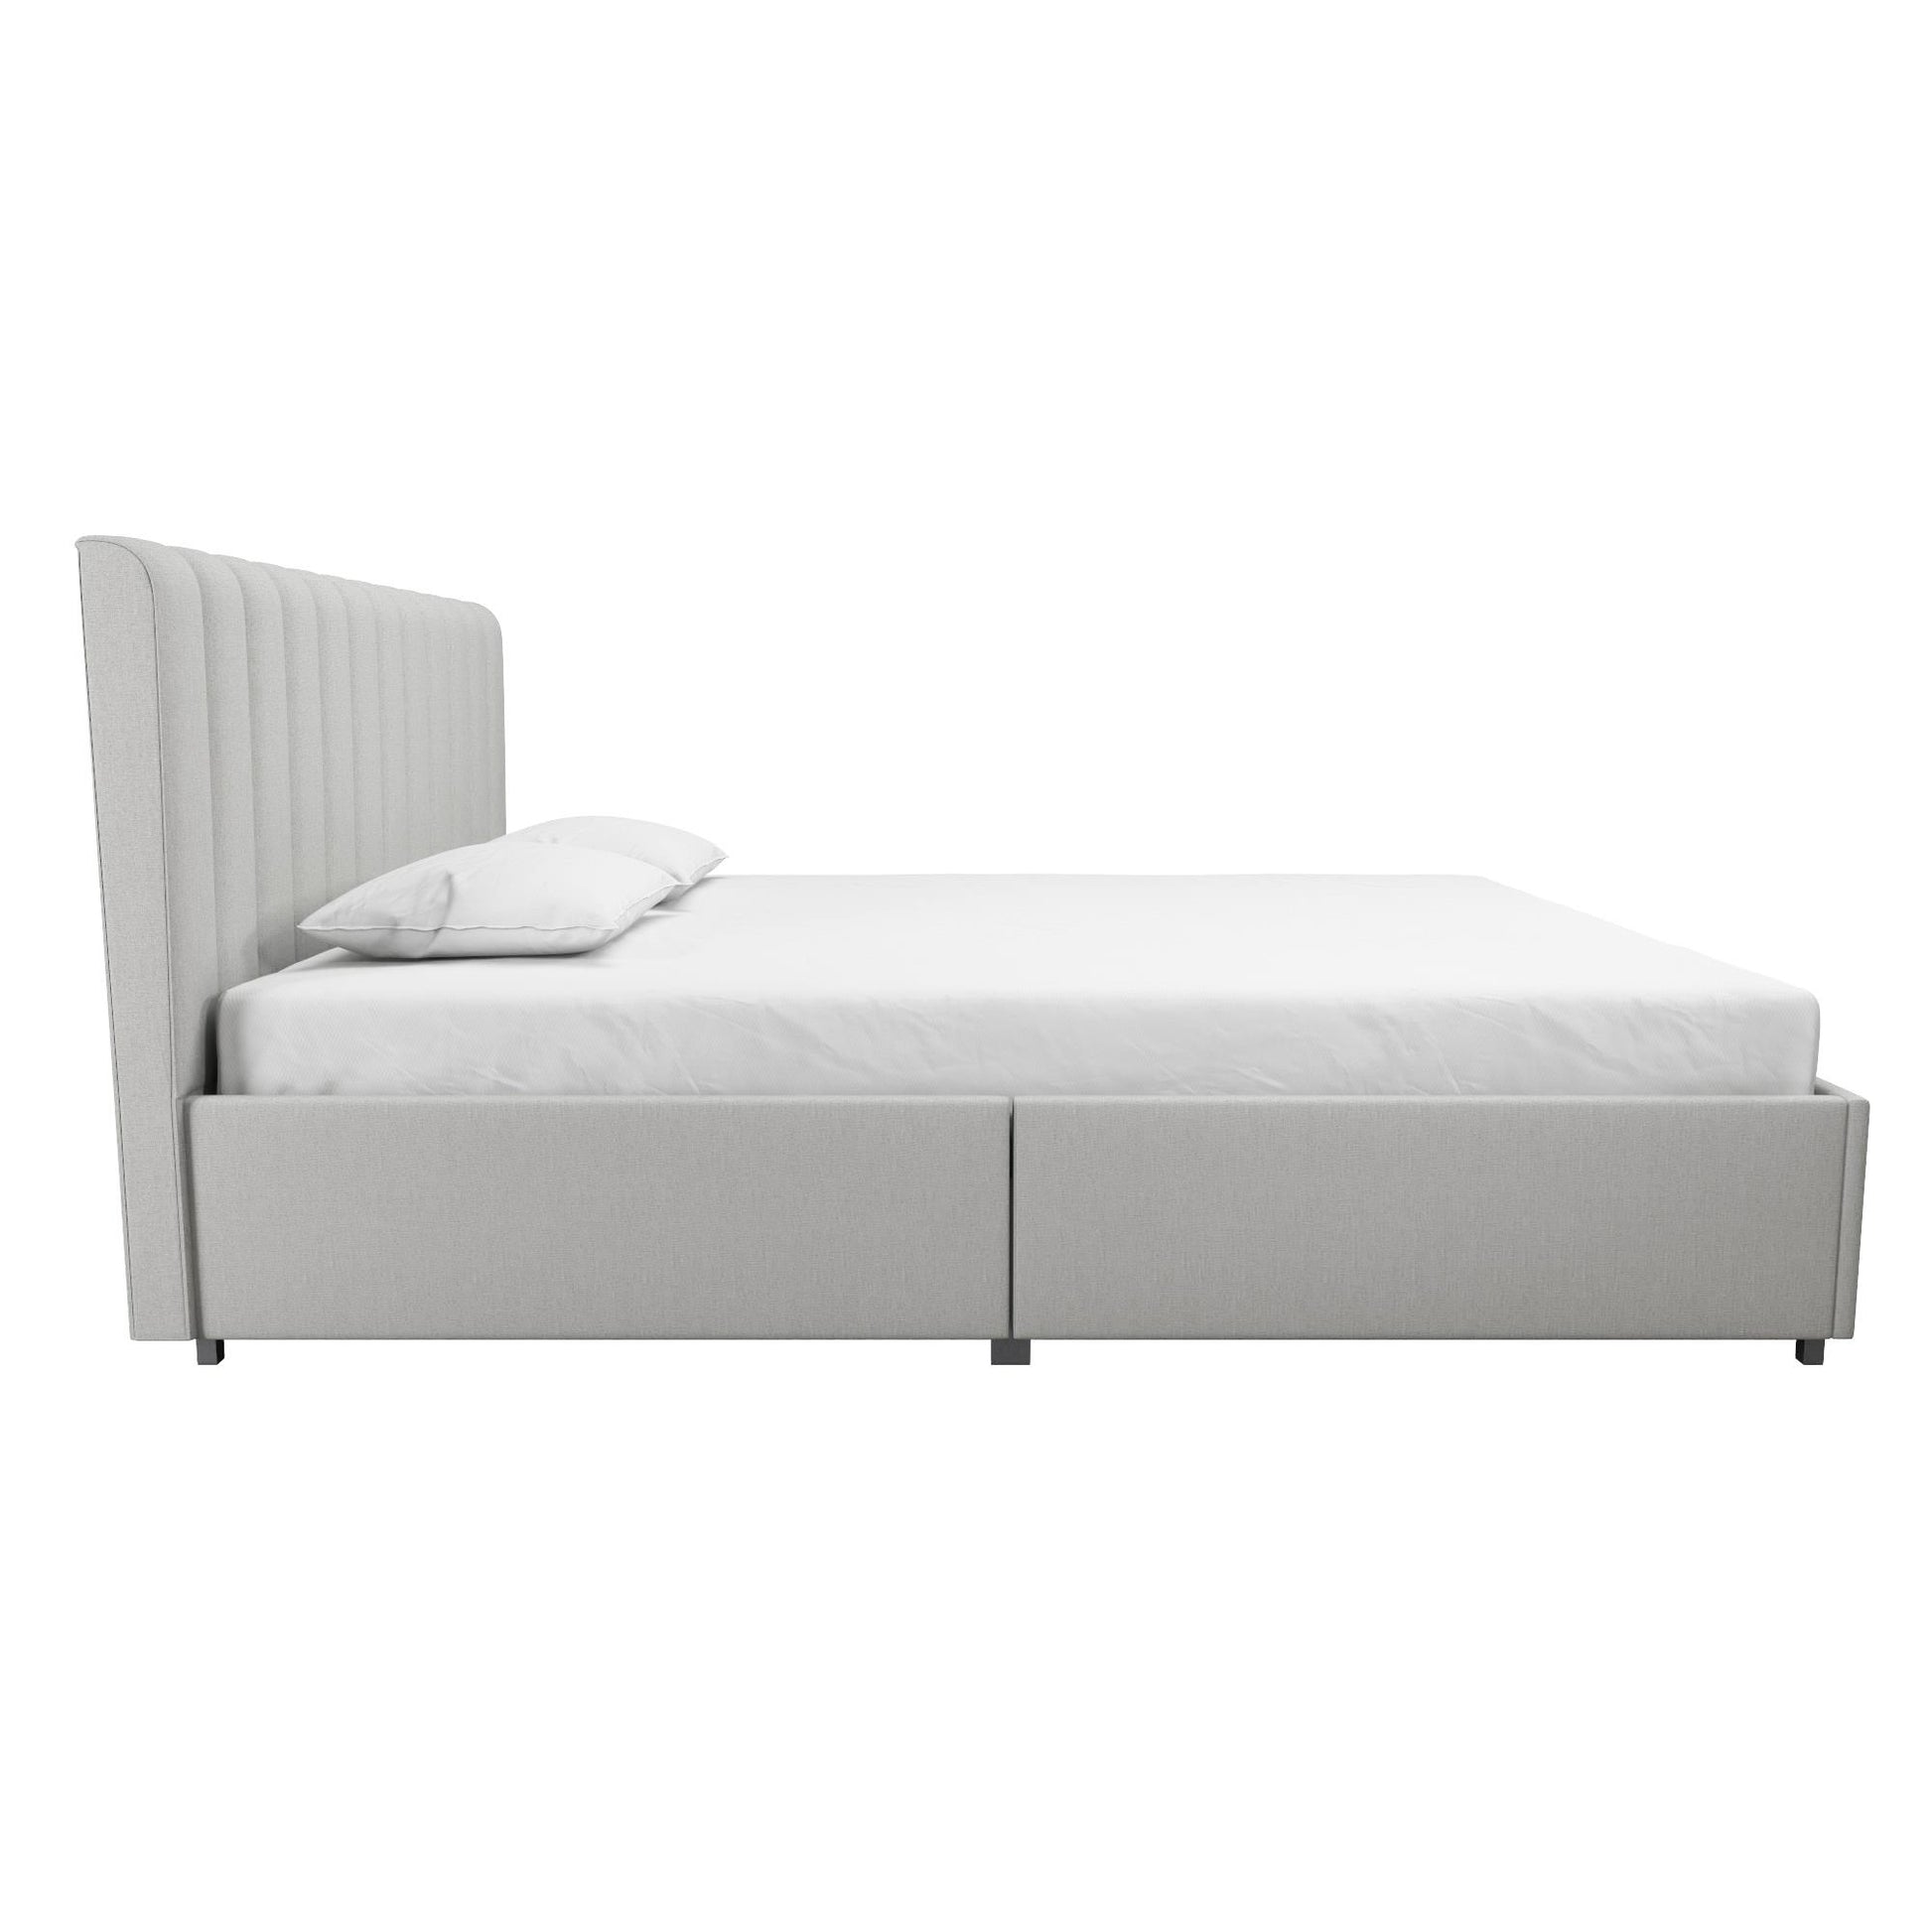 Brittany Upholstered Bed with Storage Drawers - Light Gray - Full